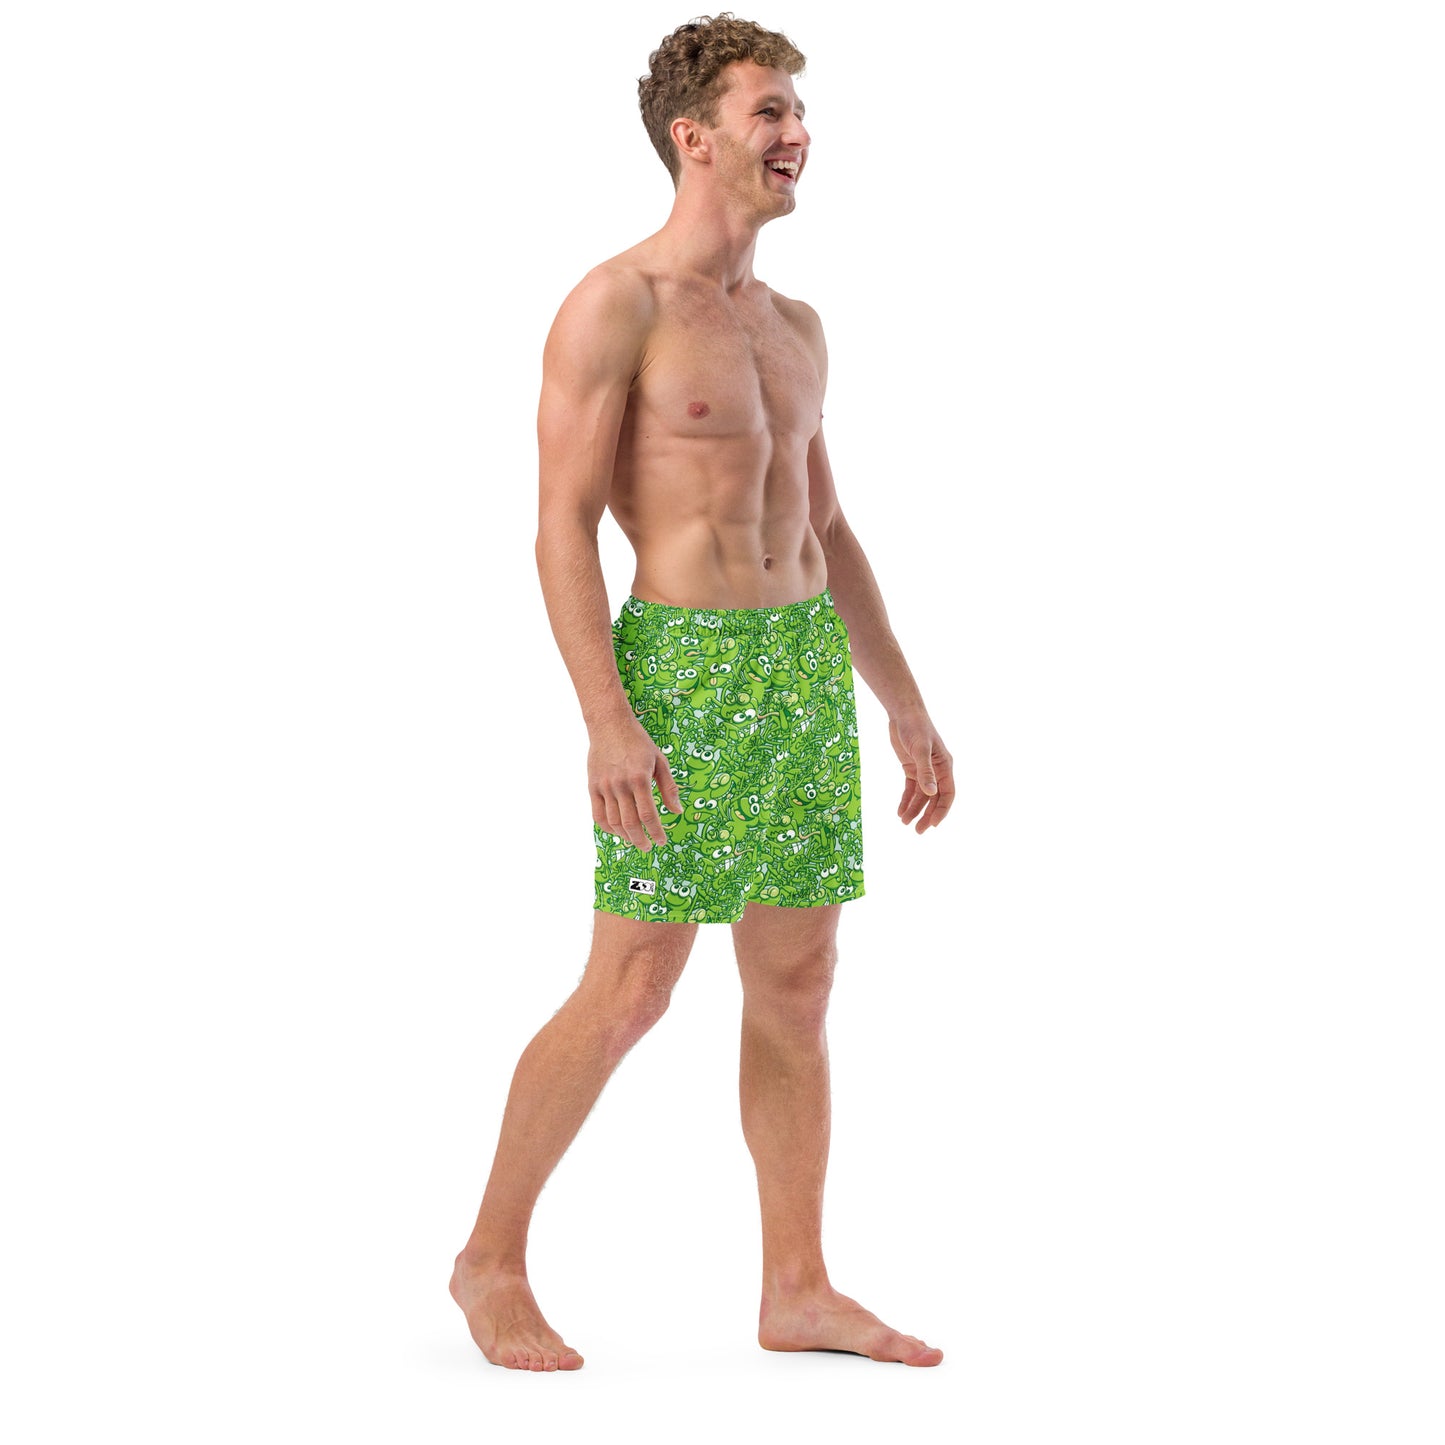 A tangled army of happy green frogs appears when the rain stops Men's swim trunks